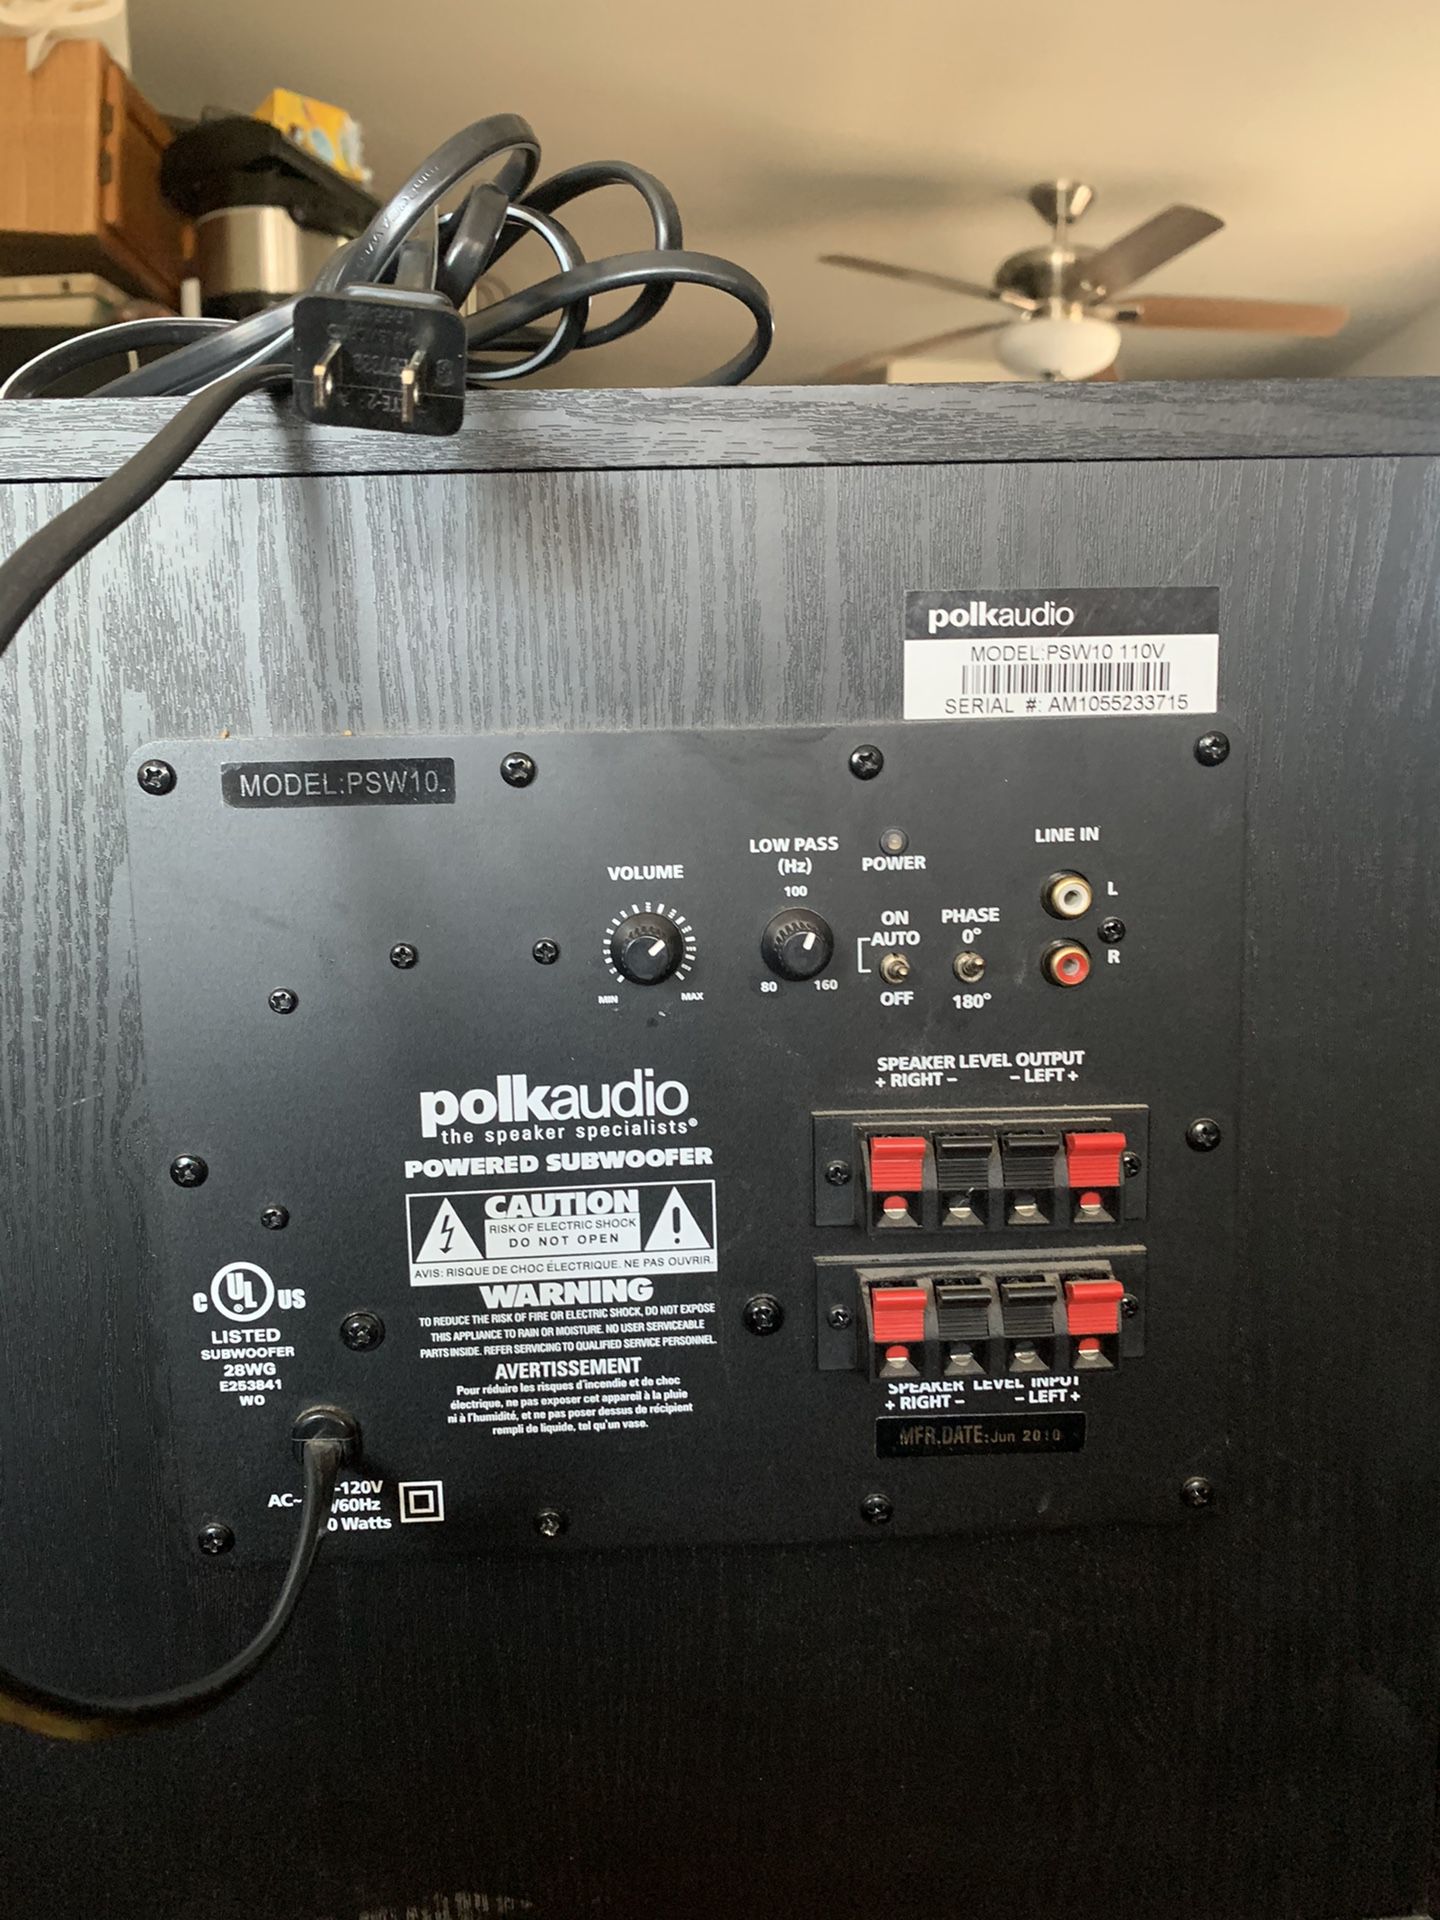 Polk audio psw10 powered subwoofer. Works great